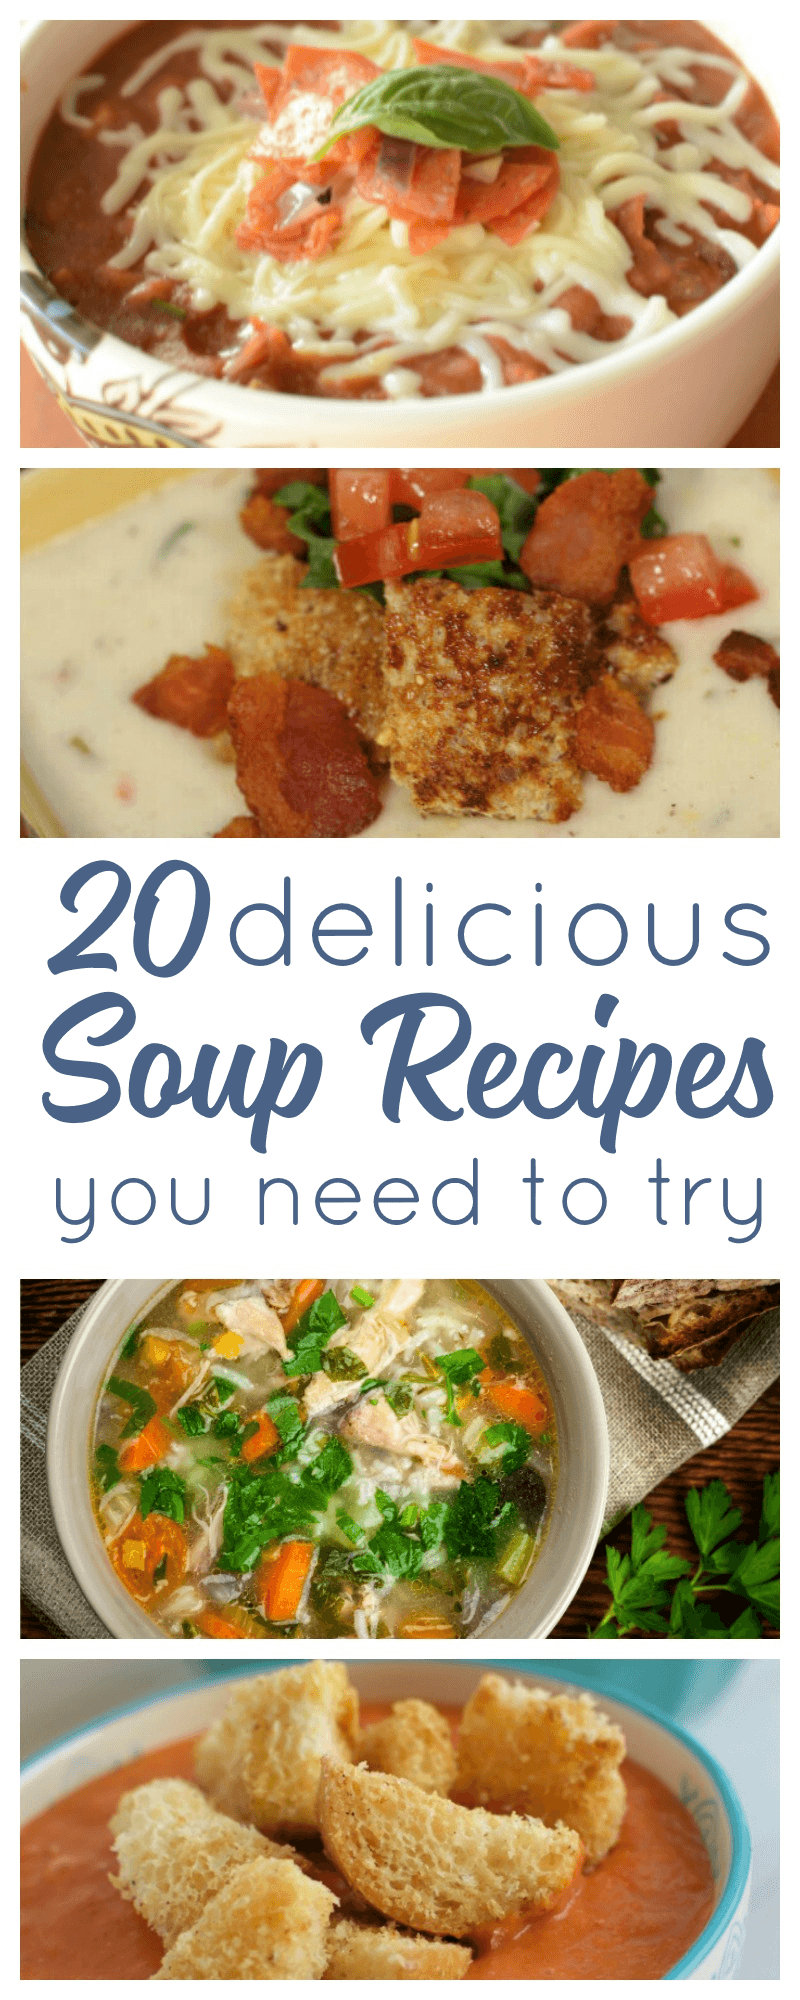 Comfort Food at its finest. These 20 soup recipes are simple, yet wonderfully delicious. Fill their stomachs while soothing their souls, soup is the perfect family meal. An easy dinner solution for busy families. 